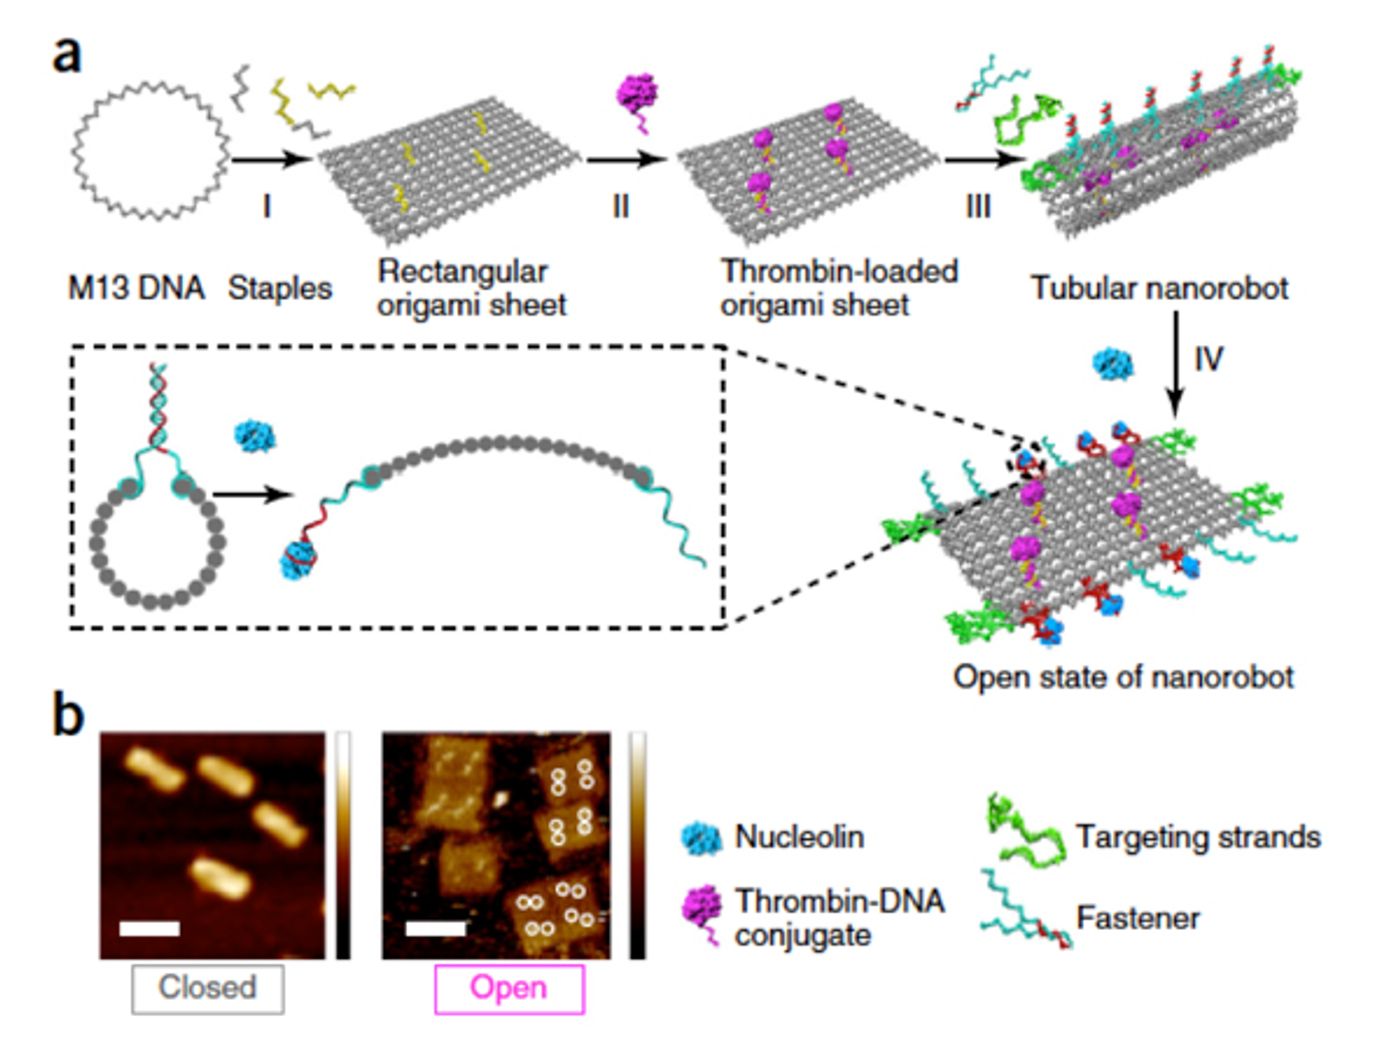 a) Design and characterization of DNA origami; b) Atomic force microscopy images of DNA nanorobots in open and closed state.  Coursey: Nature Biotechnology